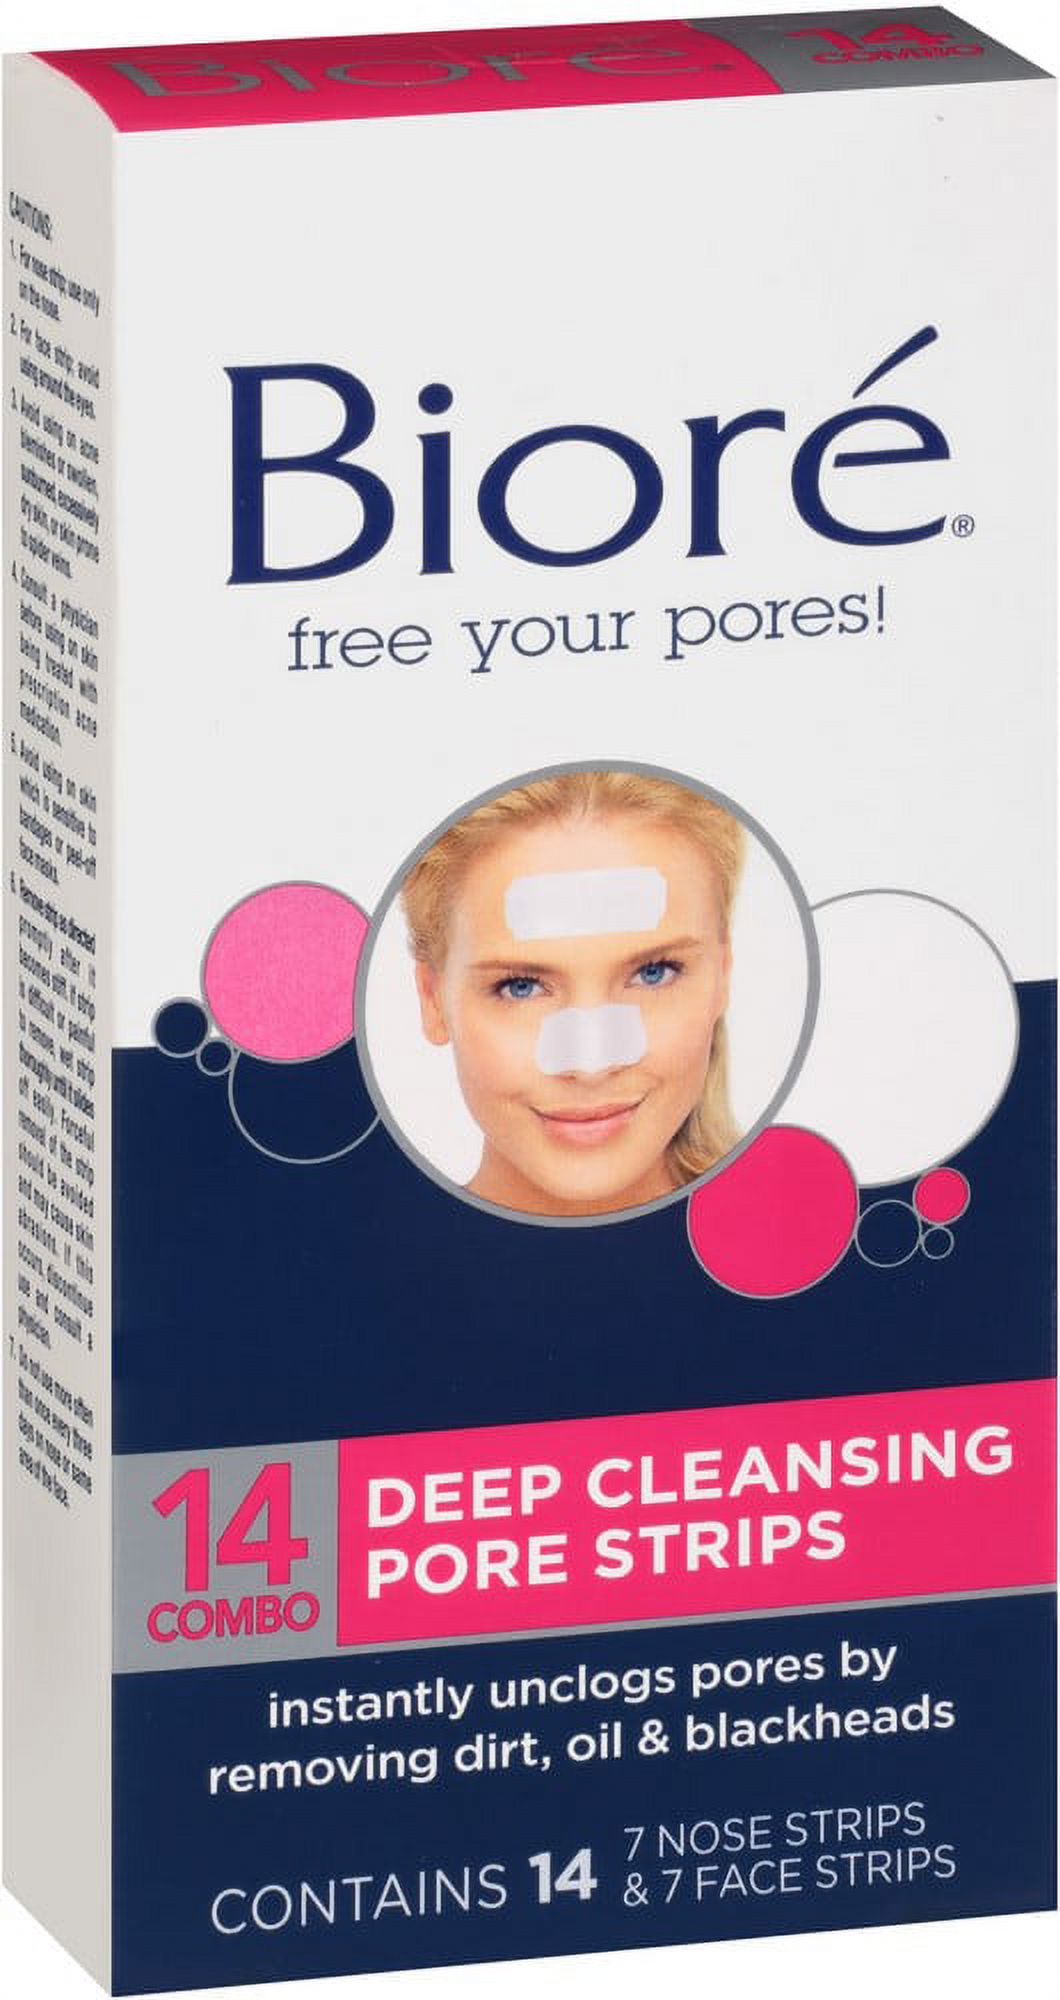 Biore Combo Pack Deep Cleansing Pore Strips Face/Nose 14 ea - image 1 of 8